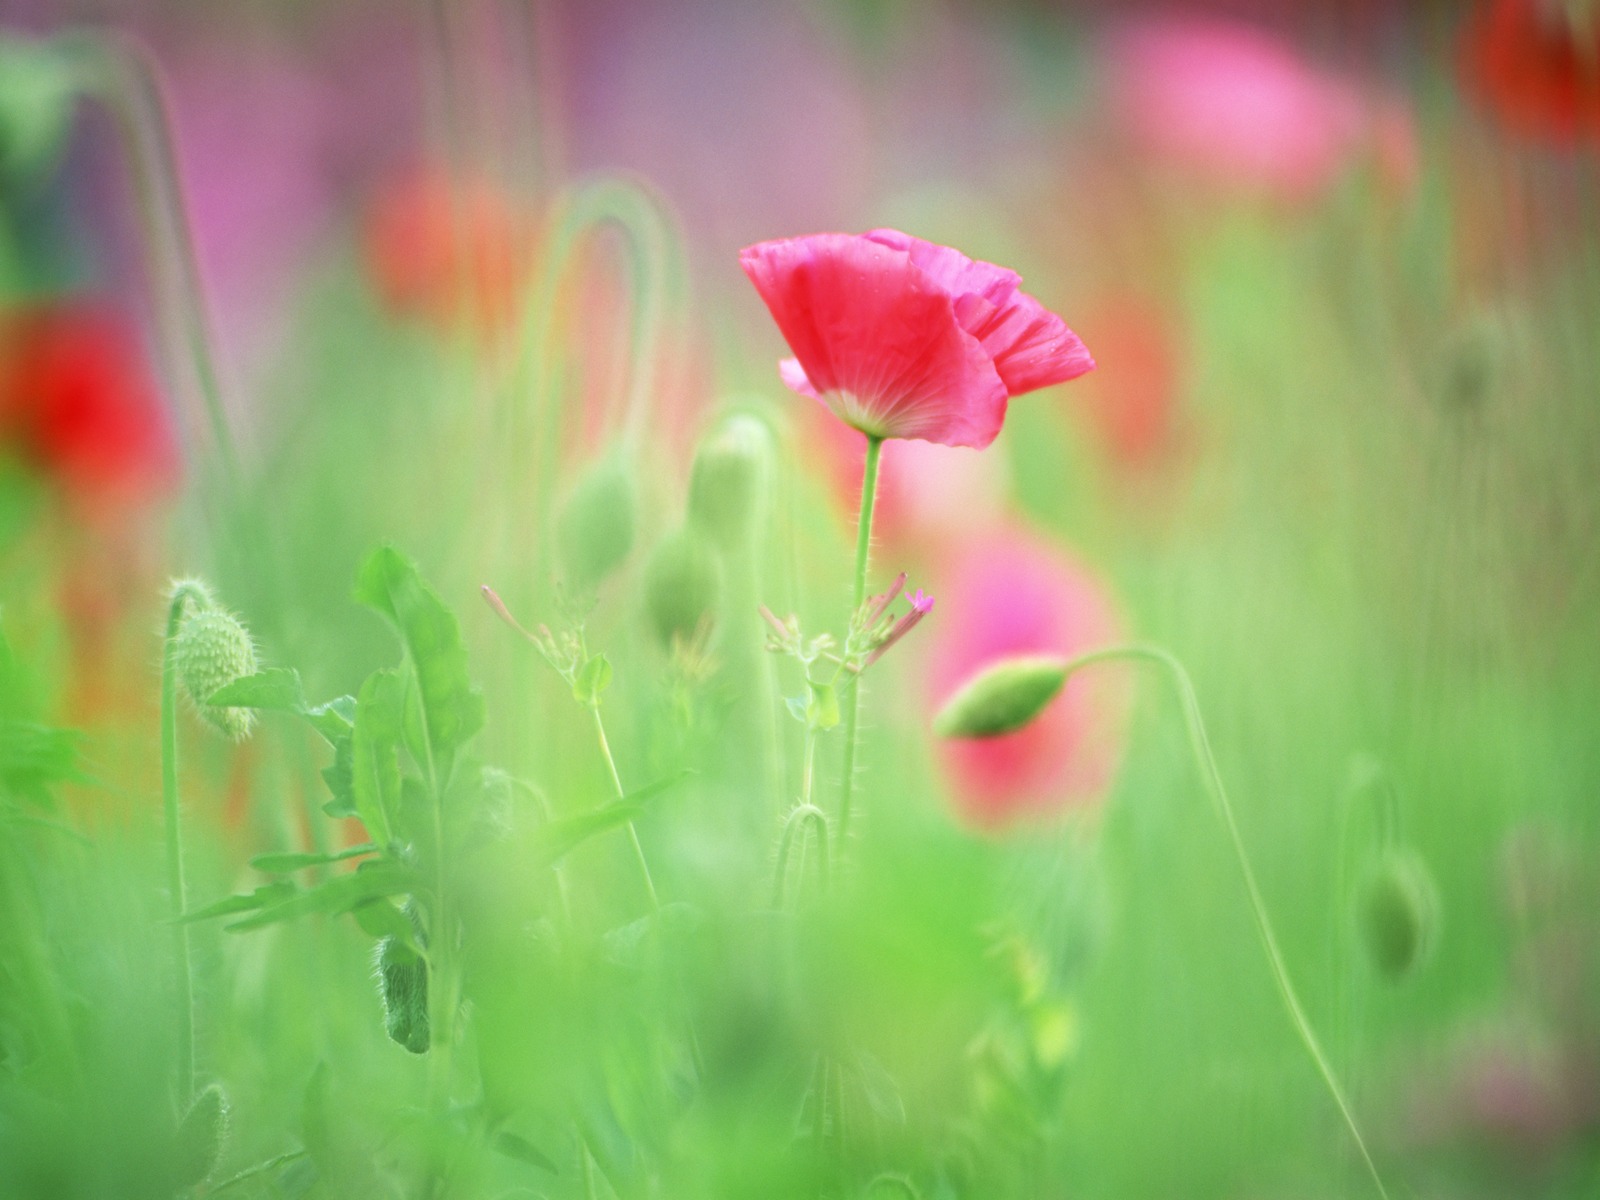 Poppy and Flower Buds Backgrounds